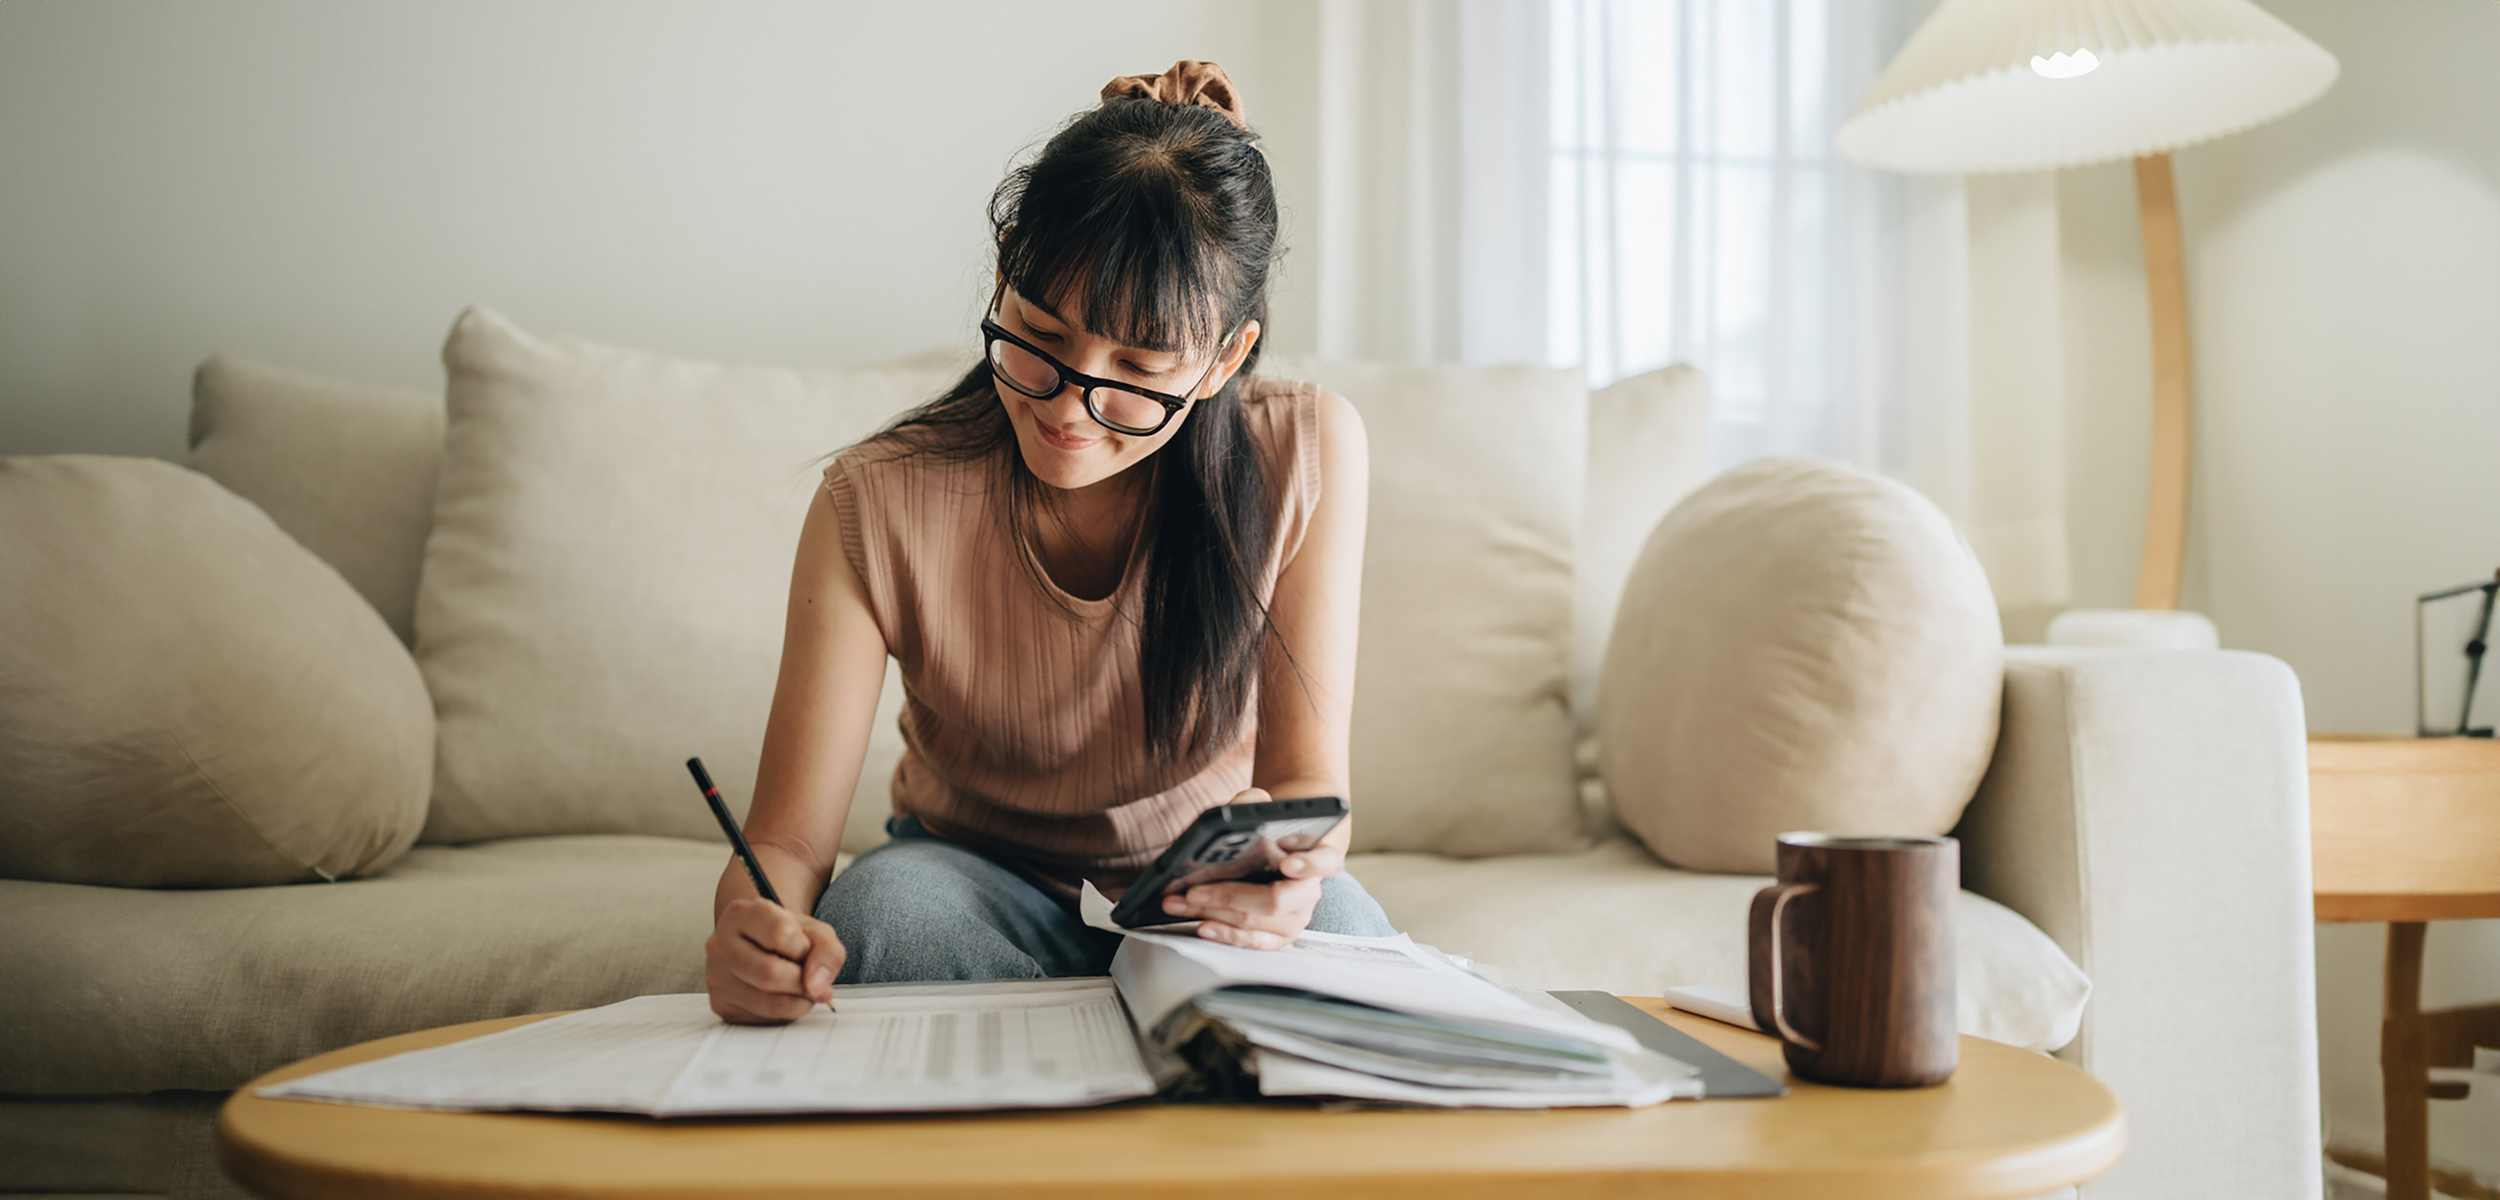 A young woman sitting on her sofa researching share certificate of deposit options